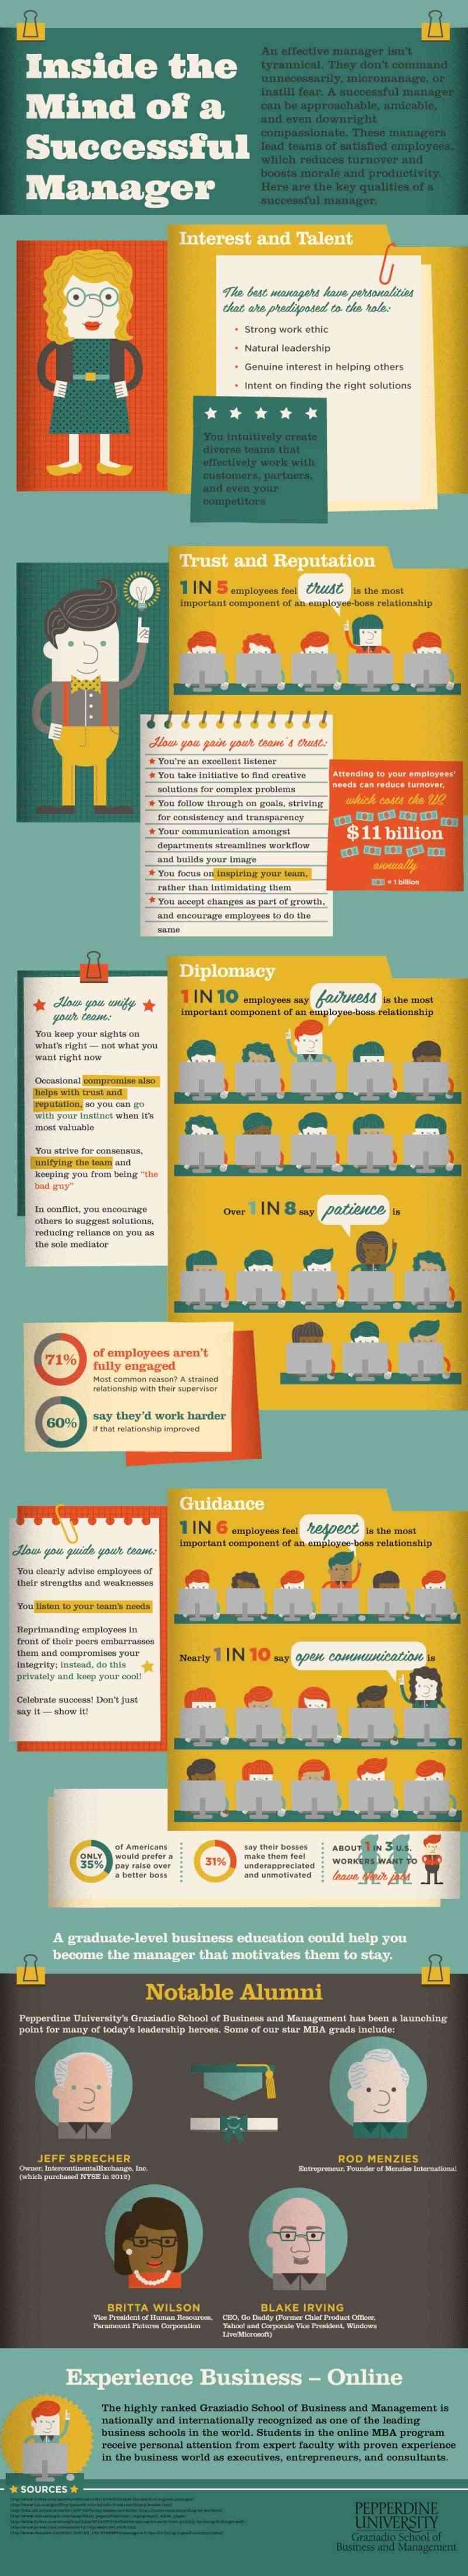 Trust, Fairness, Respect: Qualities of a Good Boss and a Great Leader (Infographic)  Trust-10